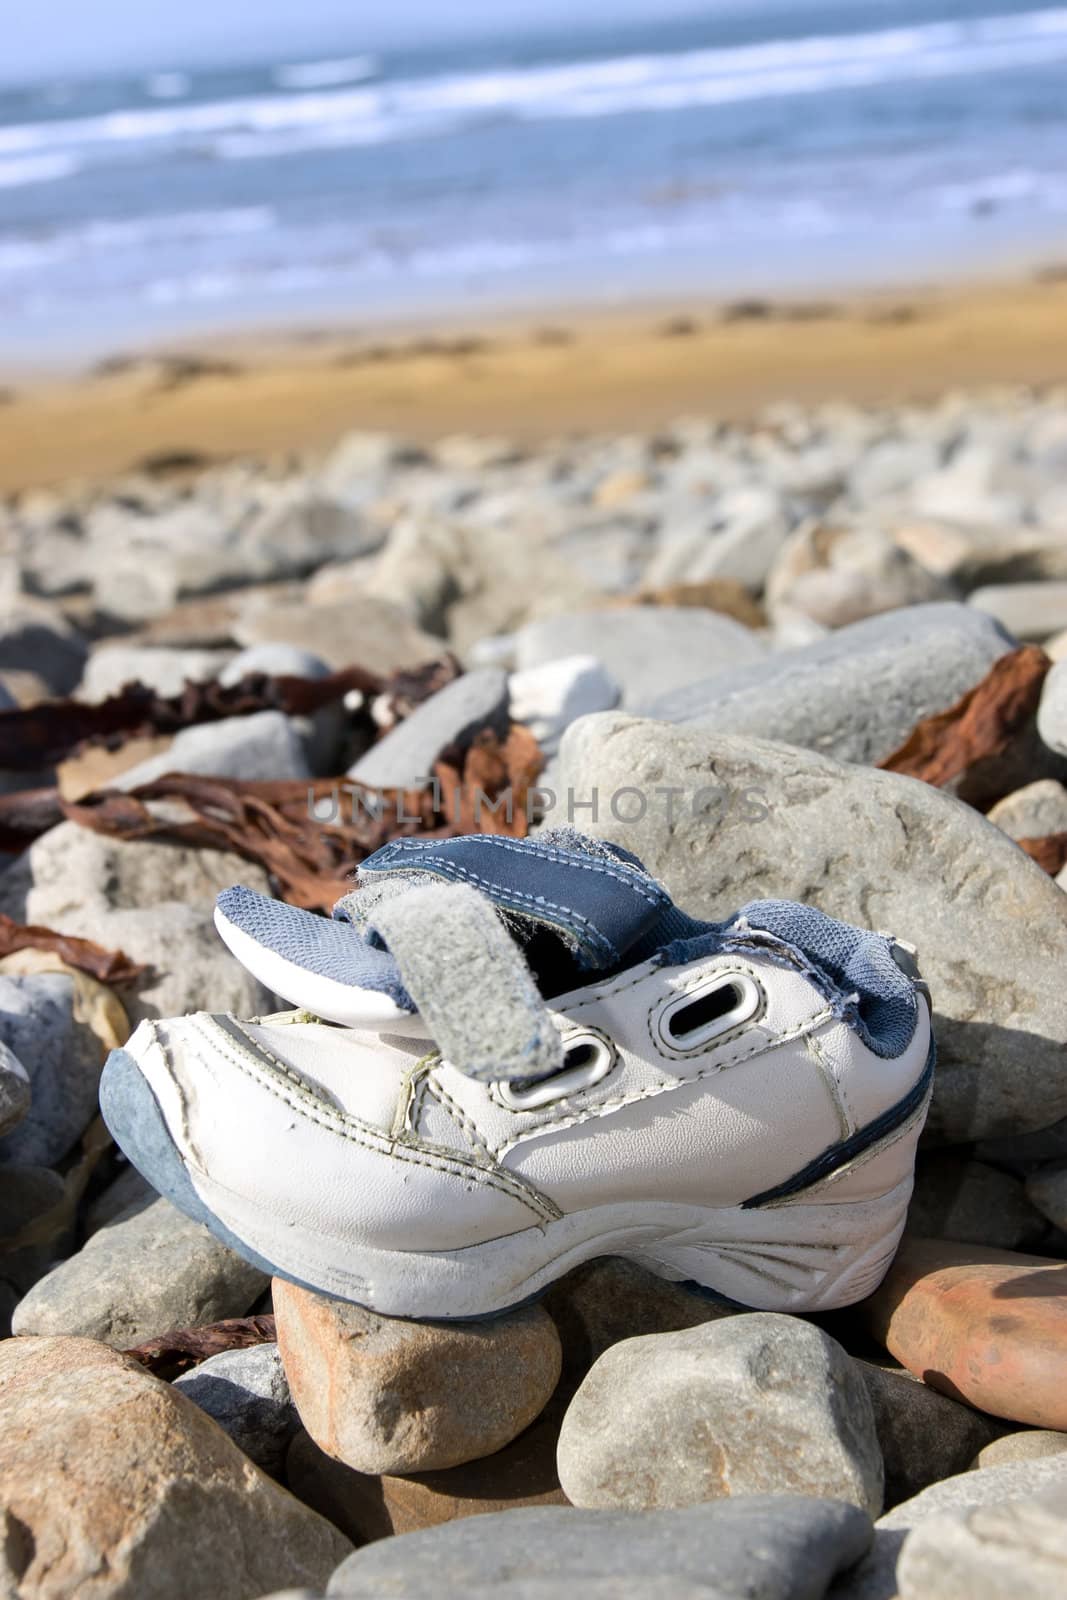 a single shoe washed up on the beach in ireland